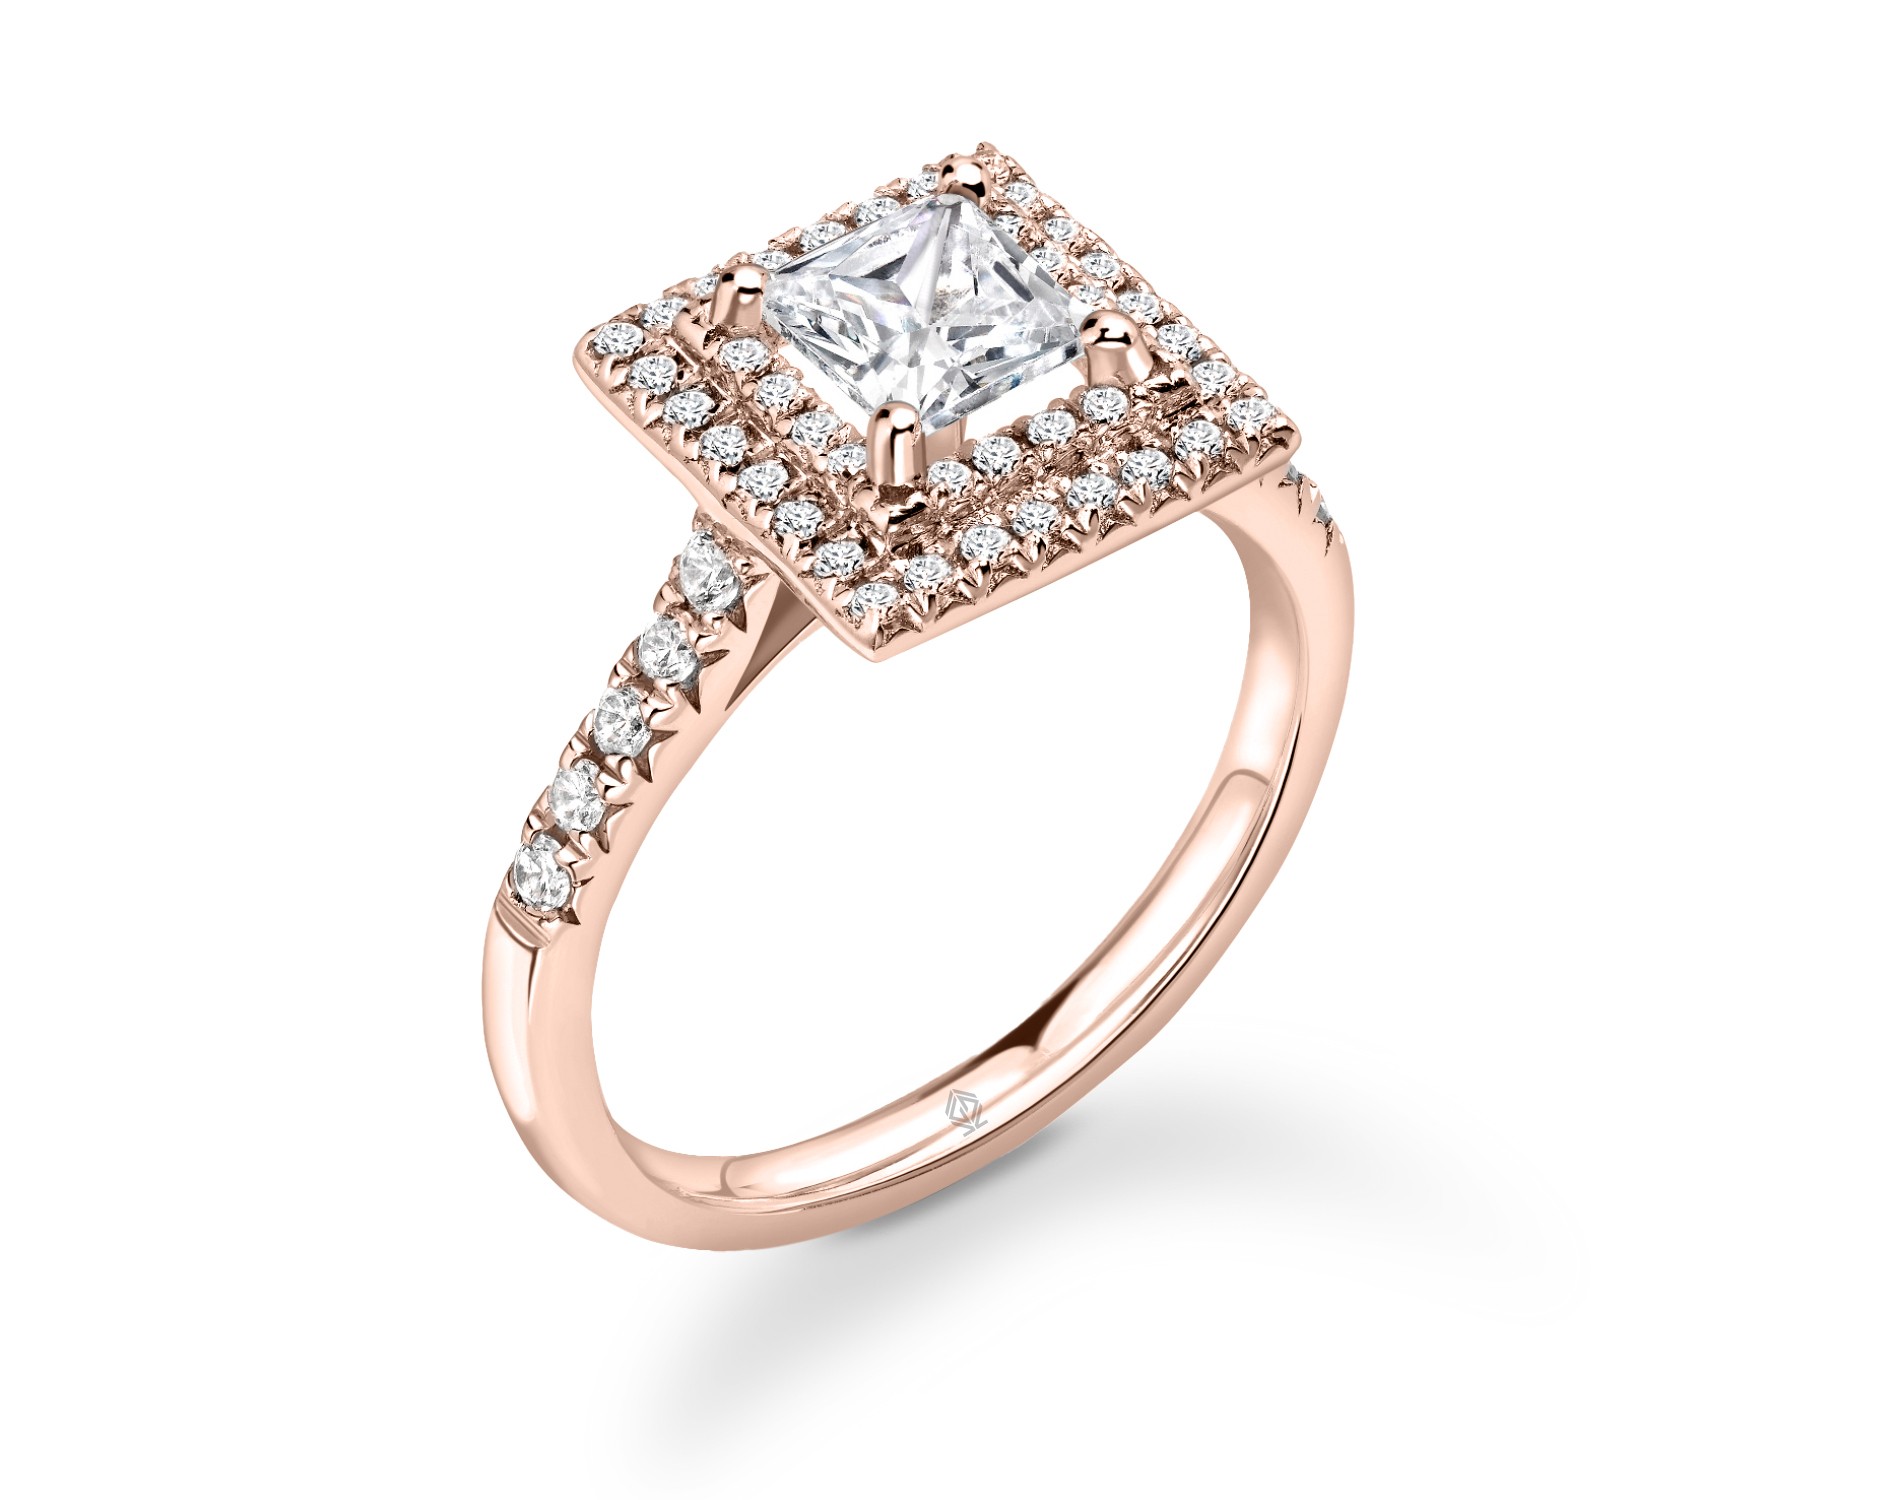 18K ROSE GOLD DOUBLE HALO PRINCESS CUT DIAMOND ENGAGEMENT RING WITH SIDE STONES PAVE SET